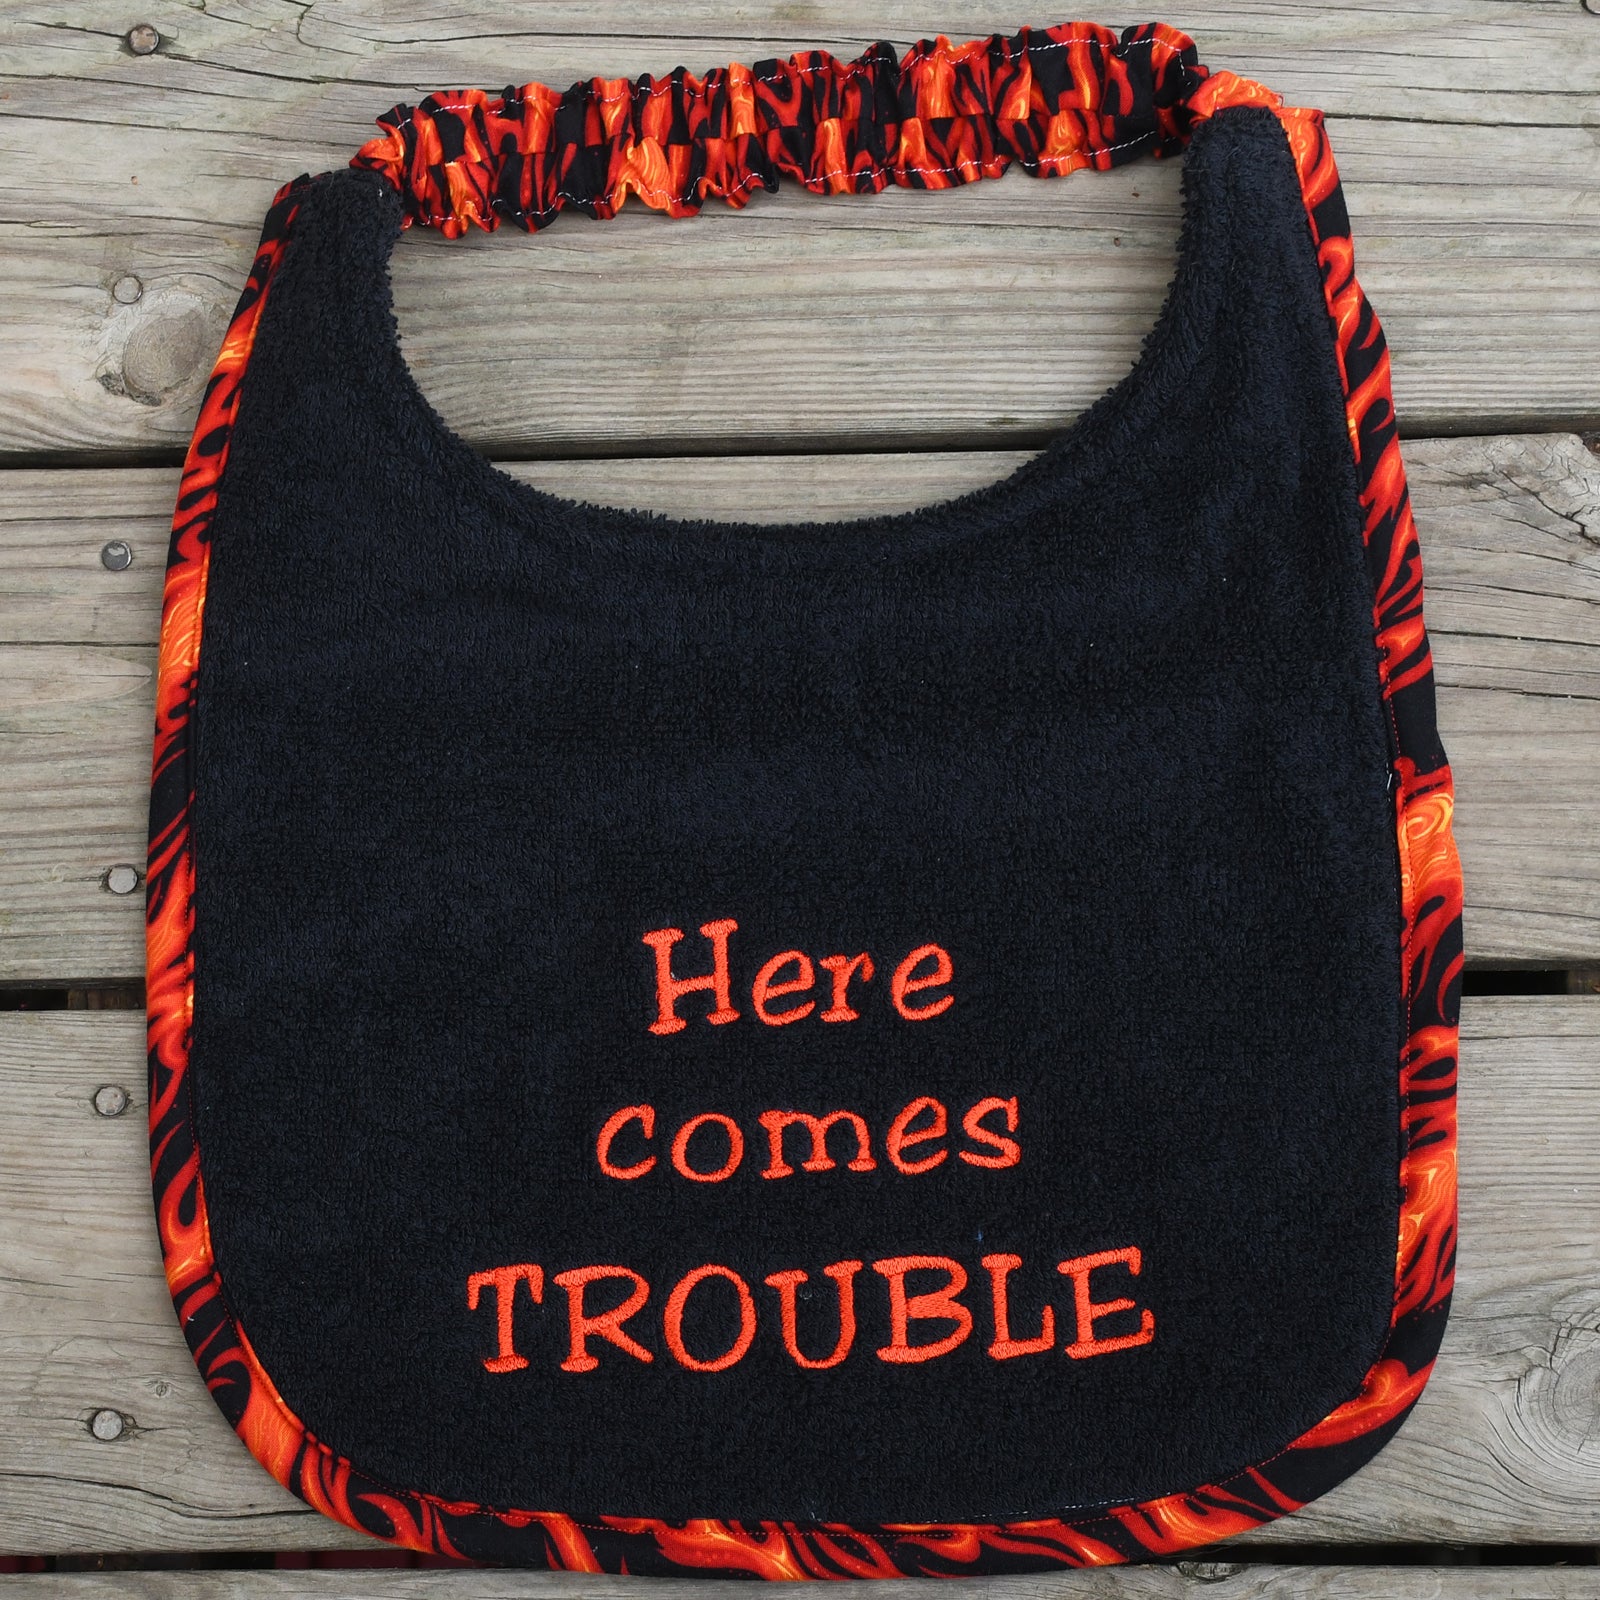 Here comes Trouble, Drool Bib